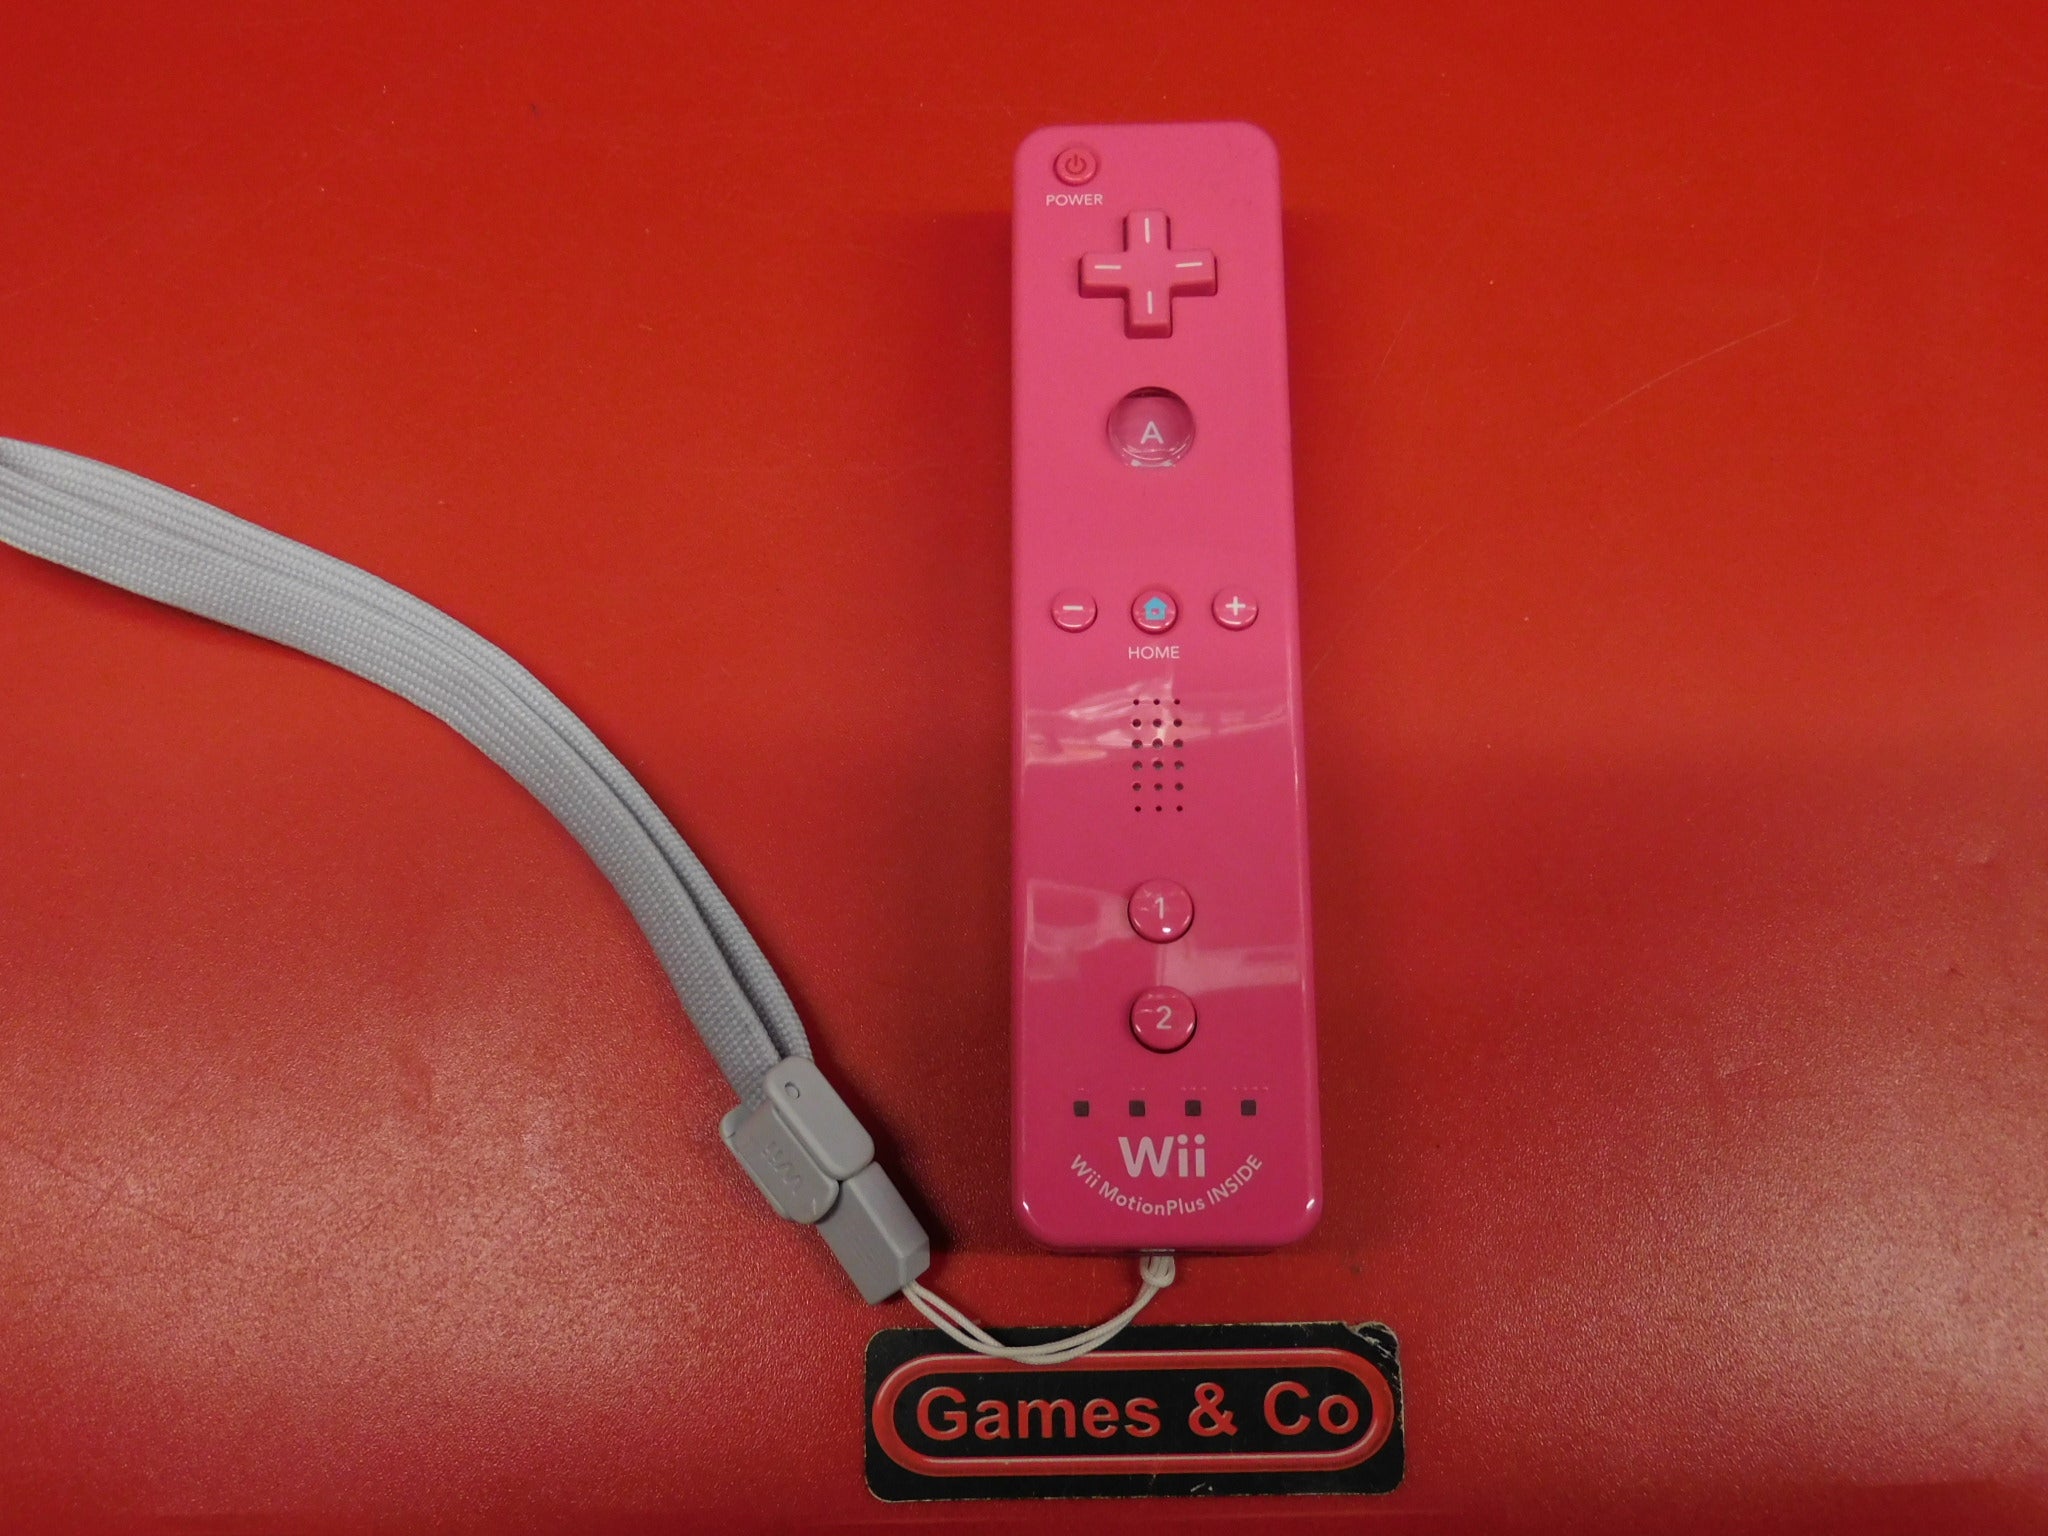 Wii remote Motion Plus inside